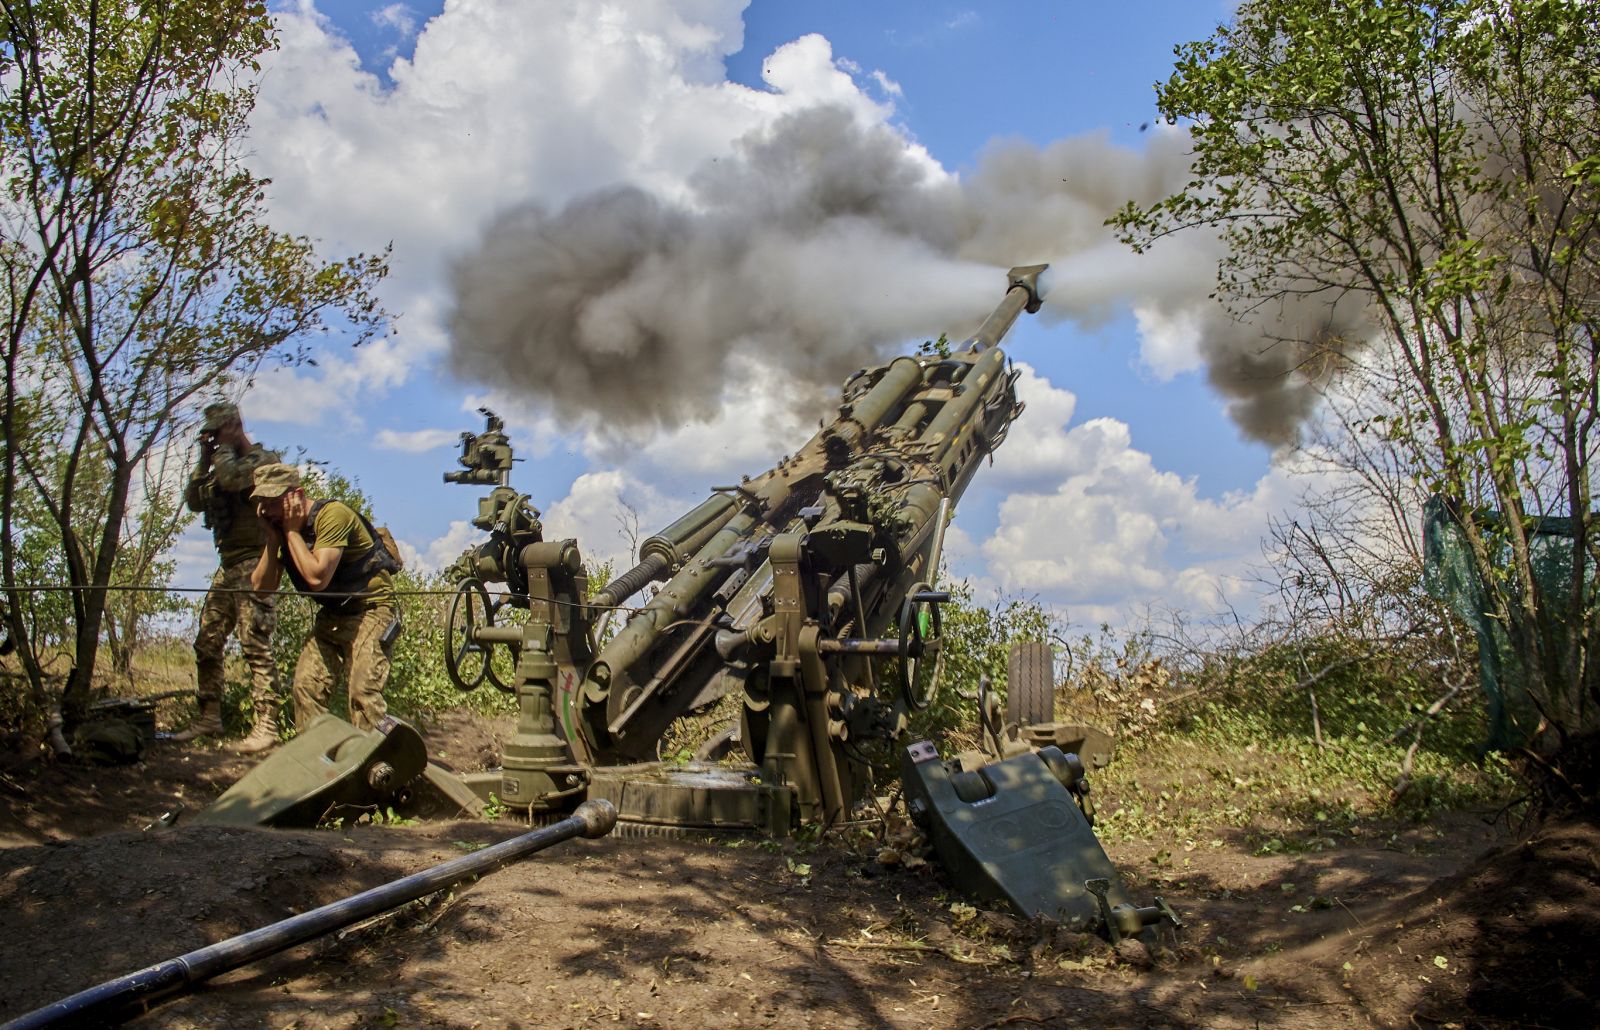 epa10096203 Ukrainian servicemen operate with American-made 155mm M777 towed howitzer on their positions in the Kharkiv area, Ukraine, 28 July 2022. Russian troops on 24 February entered Ukrainian territory, starting a conflict that has provoked destruction and a humanitarian crisis.  EPA/SERGEY KOZLOV